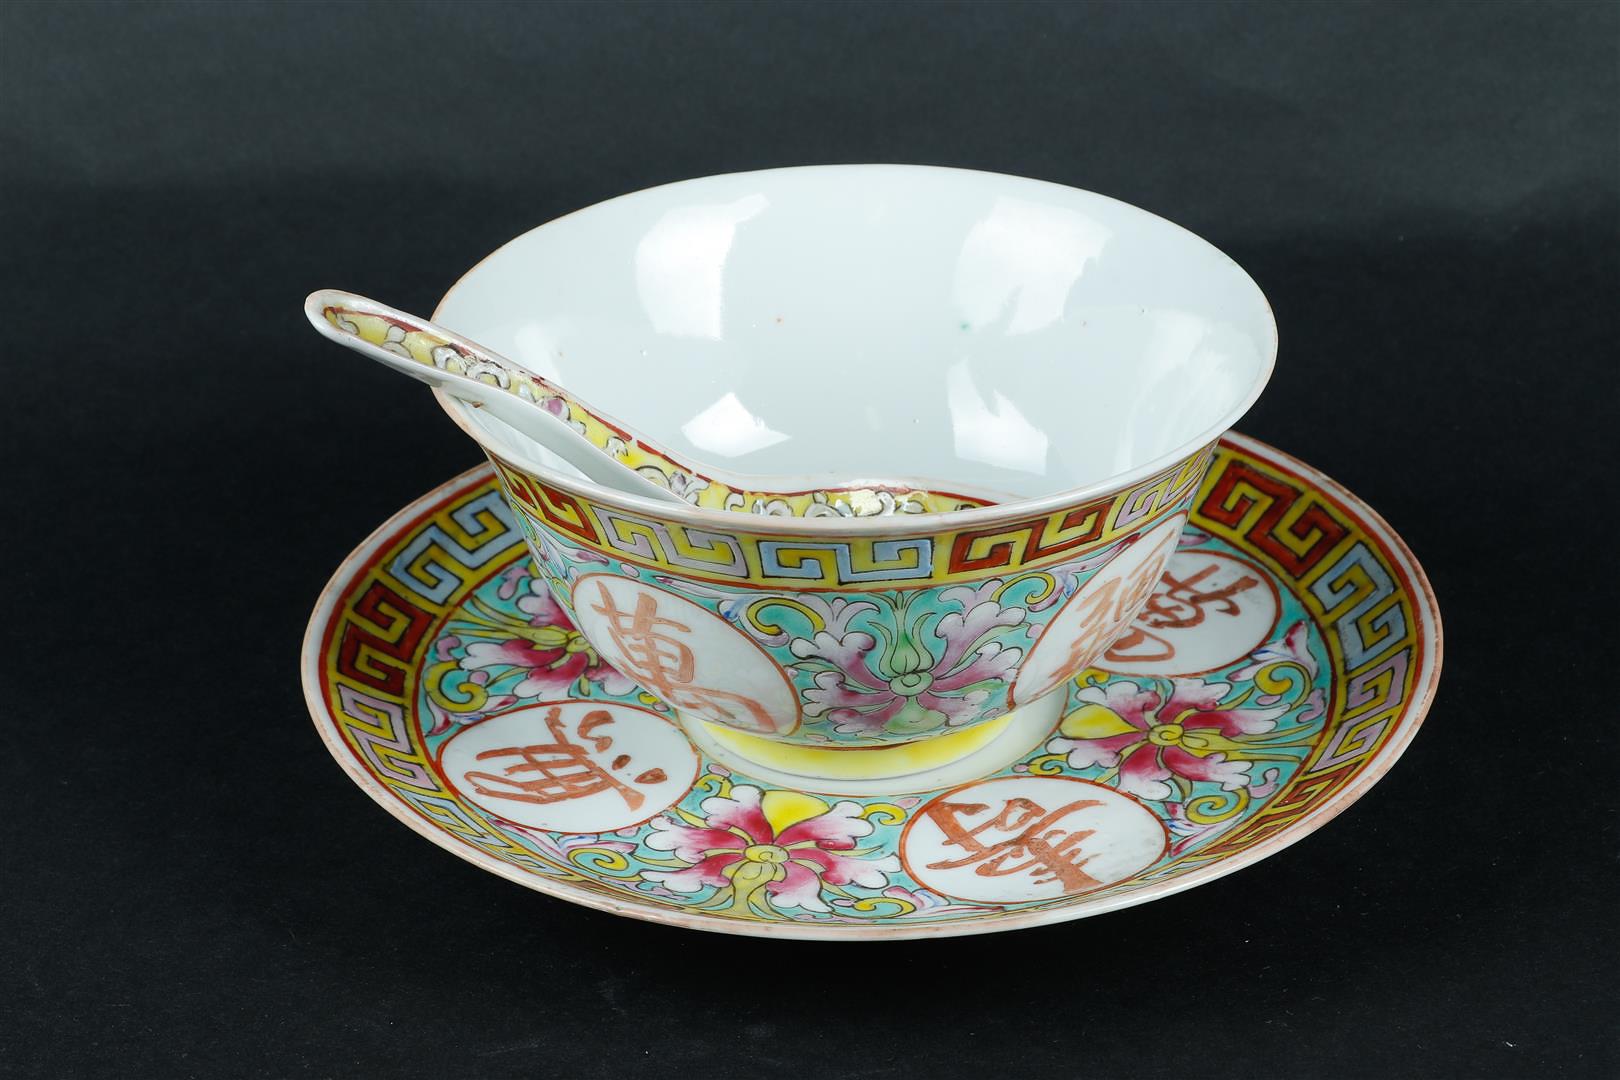 A porcelain soup bowl and saucer with spoon in Famille Rose decor. China, 19/20th century.